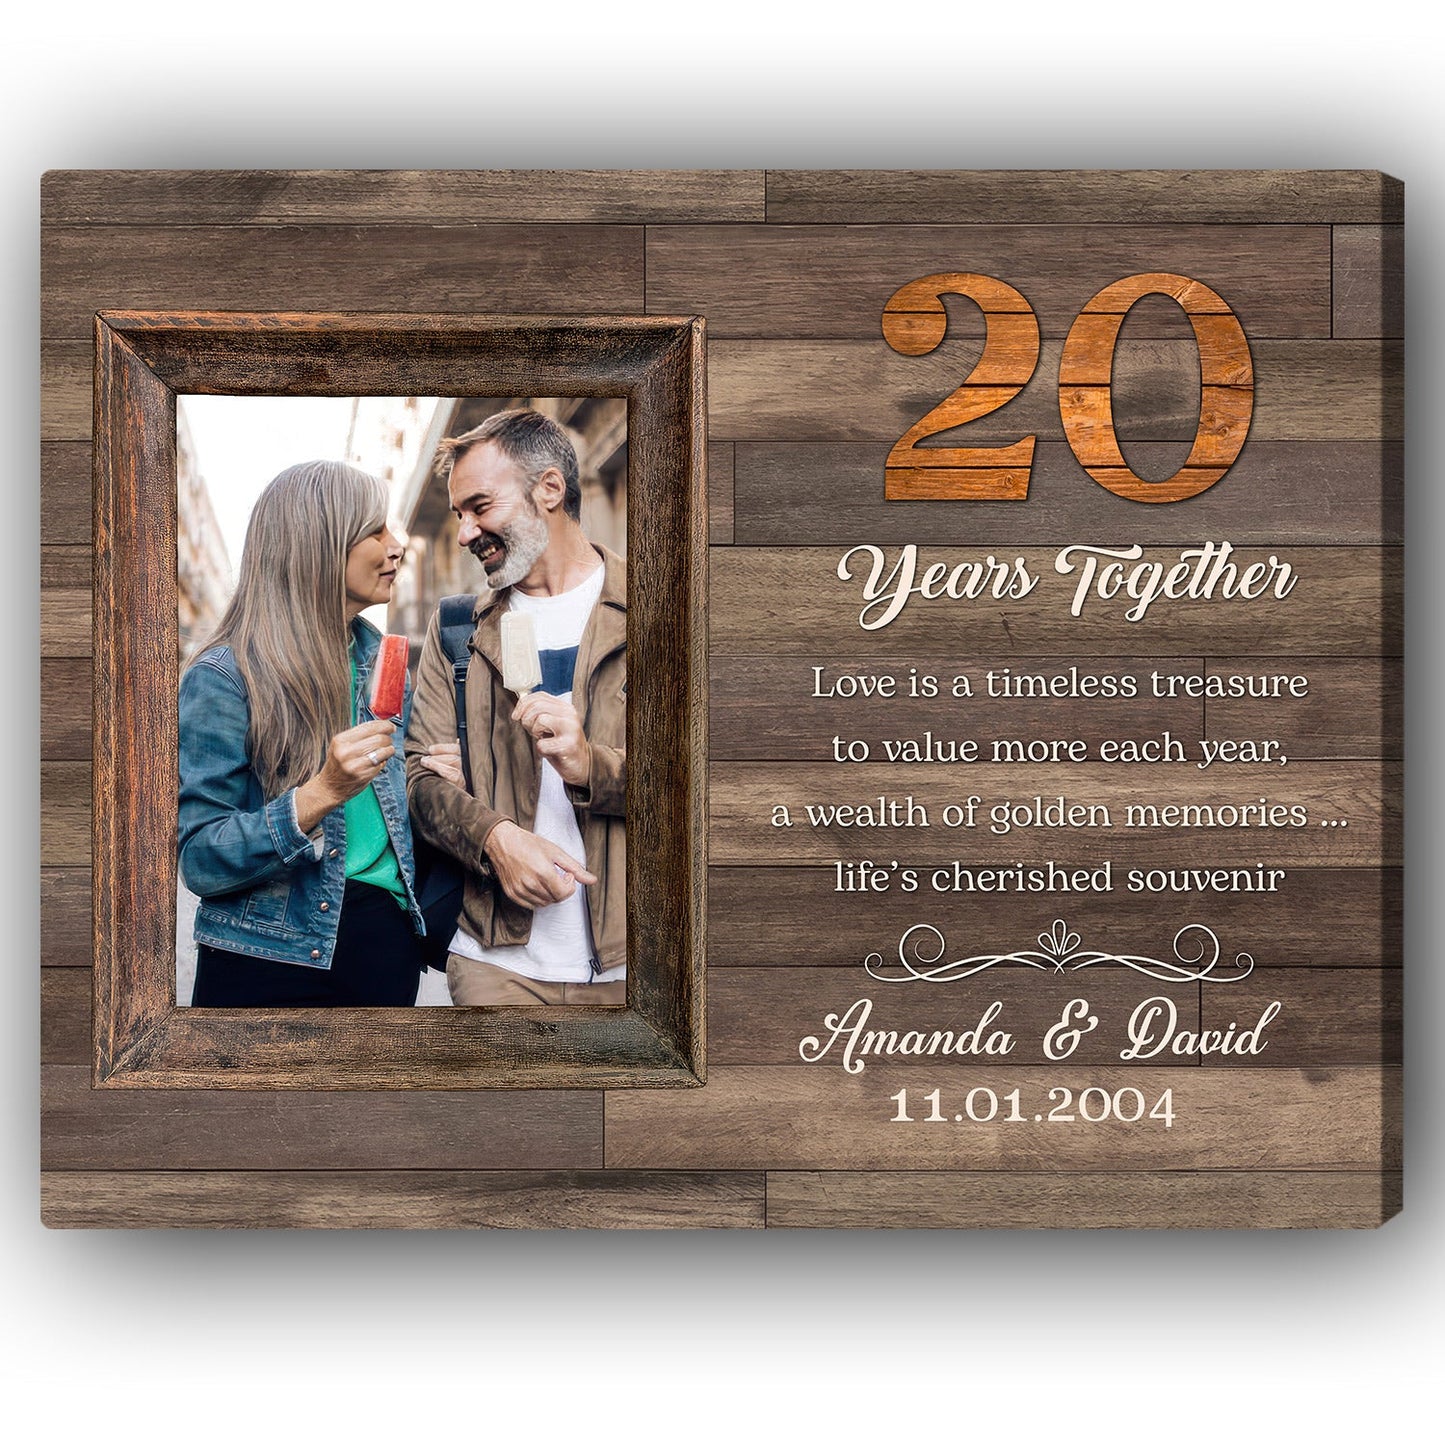 20 Years Together - Personalized 20 Year Anniversary gift For Husband or Wife - Custom Canvas Print - MyMindfulGifts